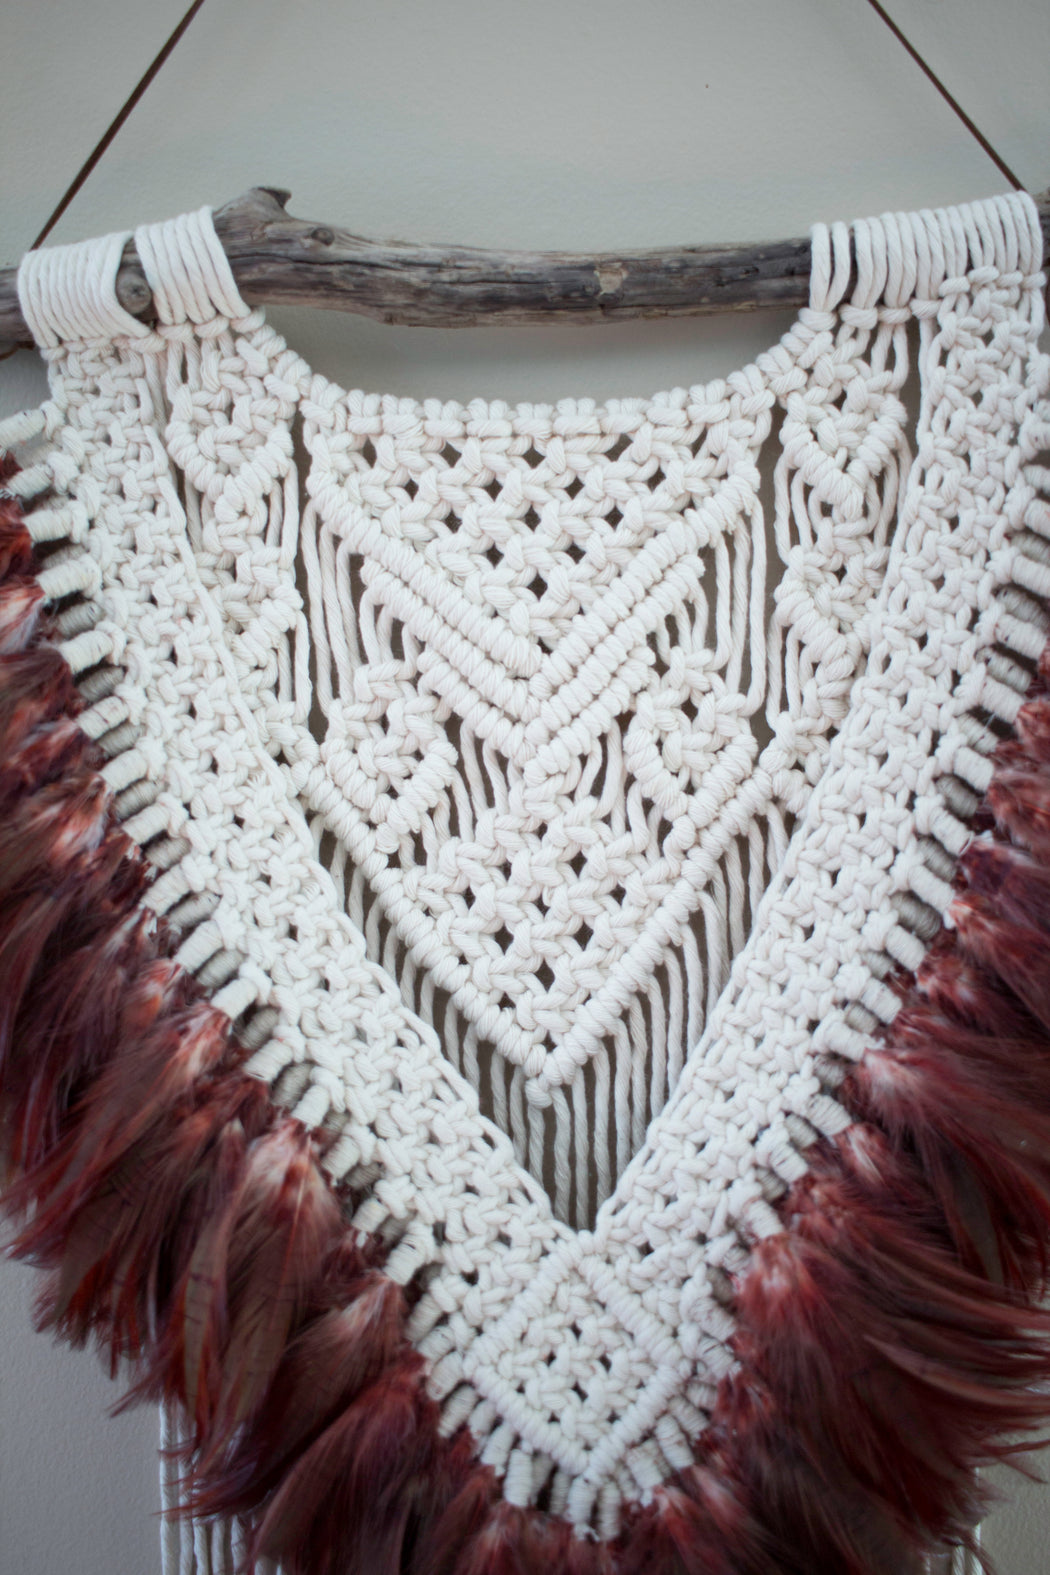 Medium Macrame Wall Hanging 100% Cotton Rope and Feathers